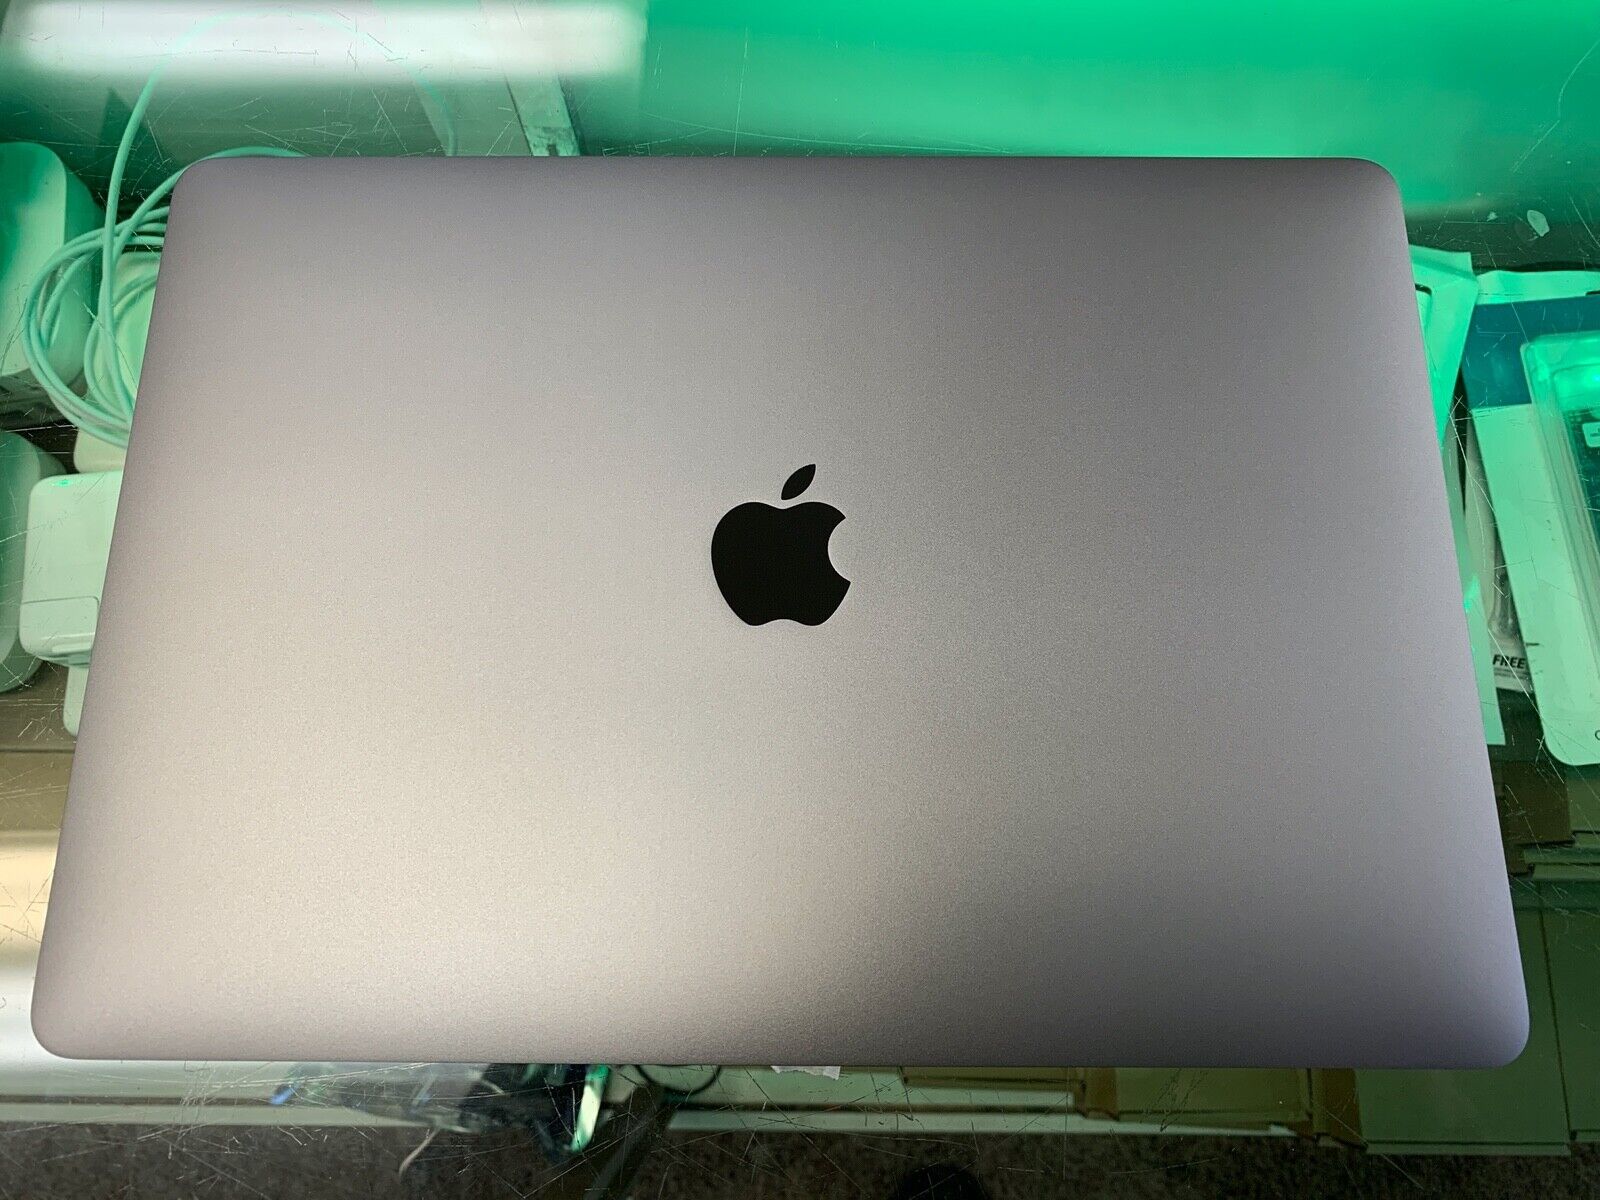 Apple MacBook Air 13 inch Laptop - A2179 (January, 2020) for sale 